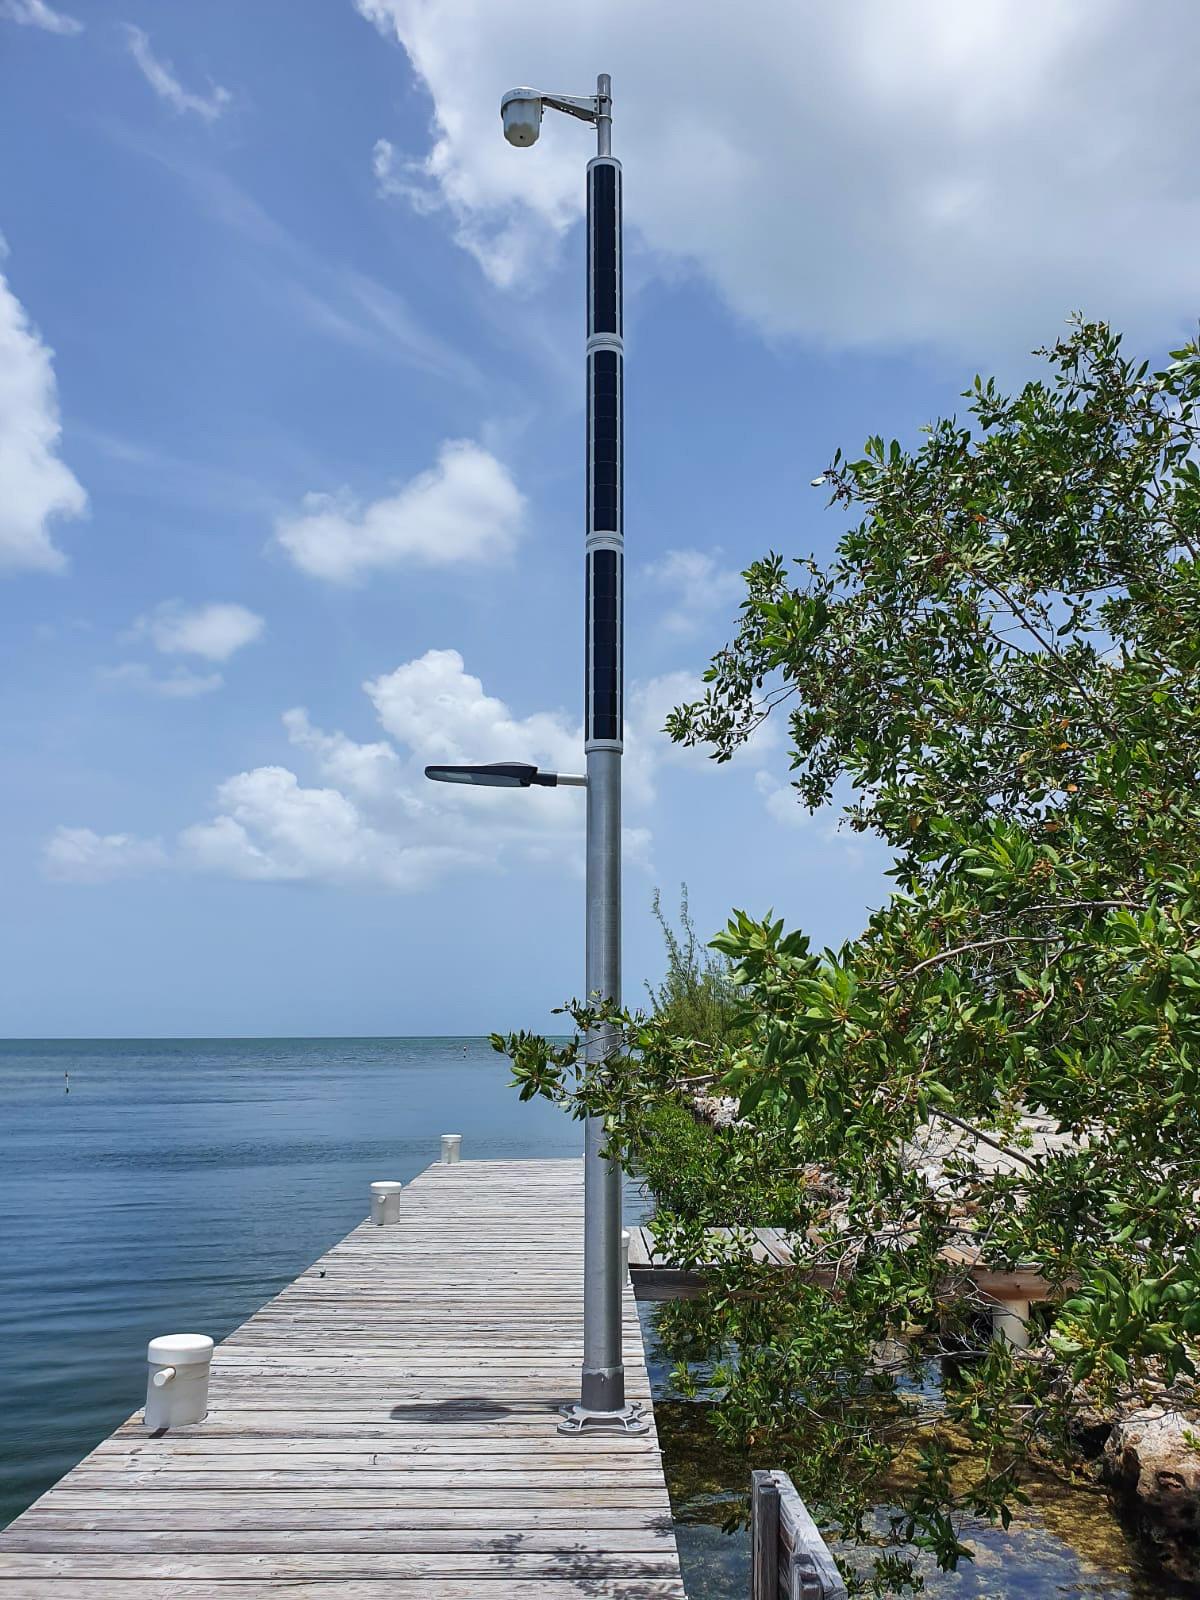 Soluxio solar dock lights with WiFi in marina area in the Cayman Islands